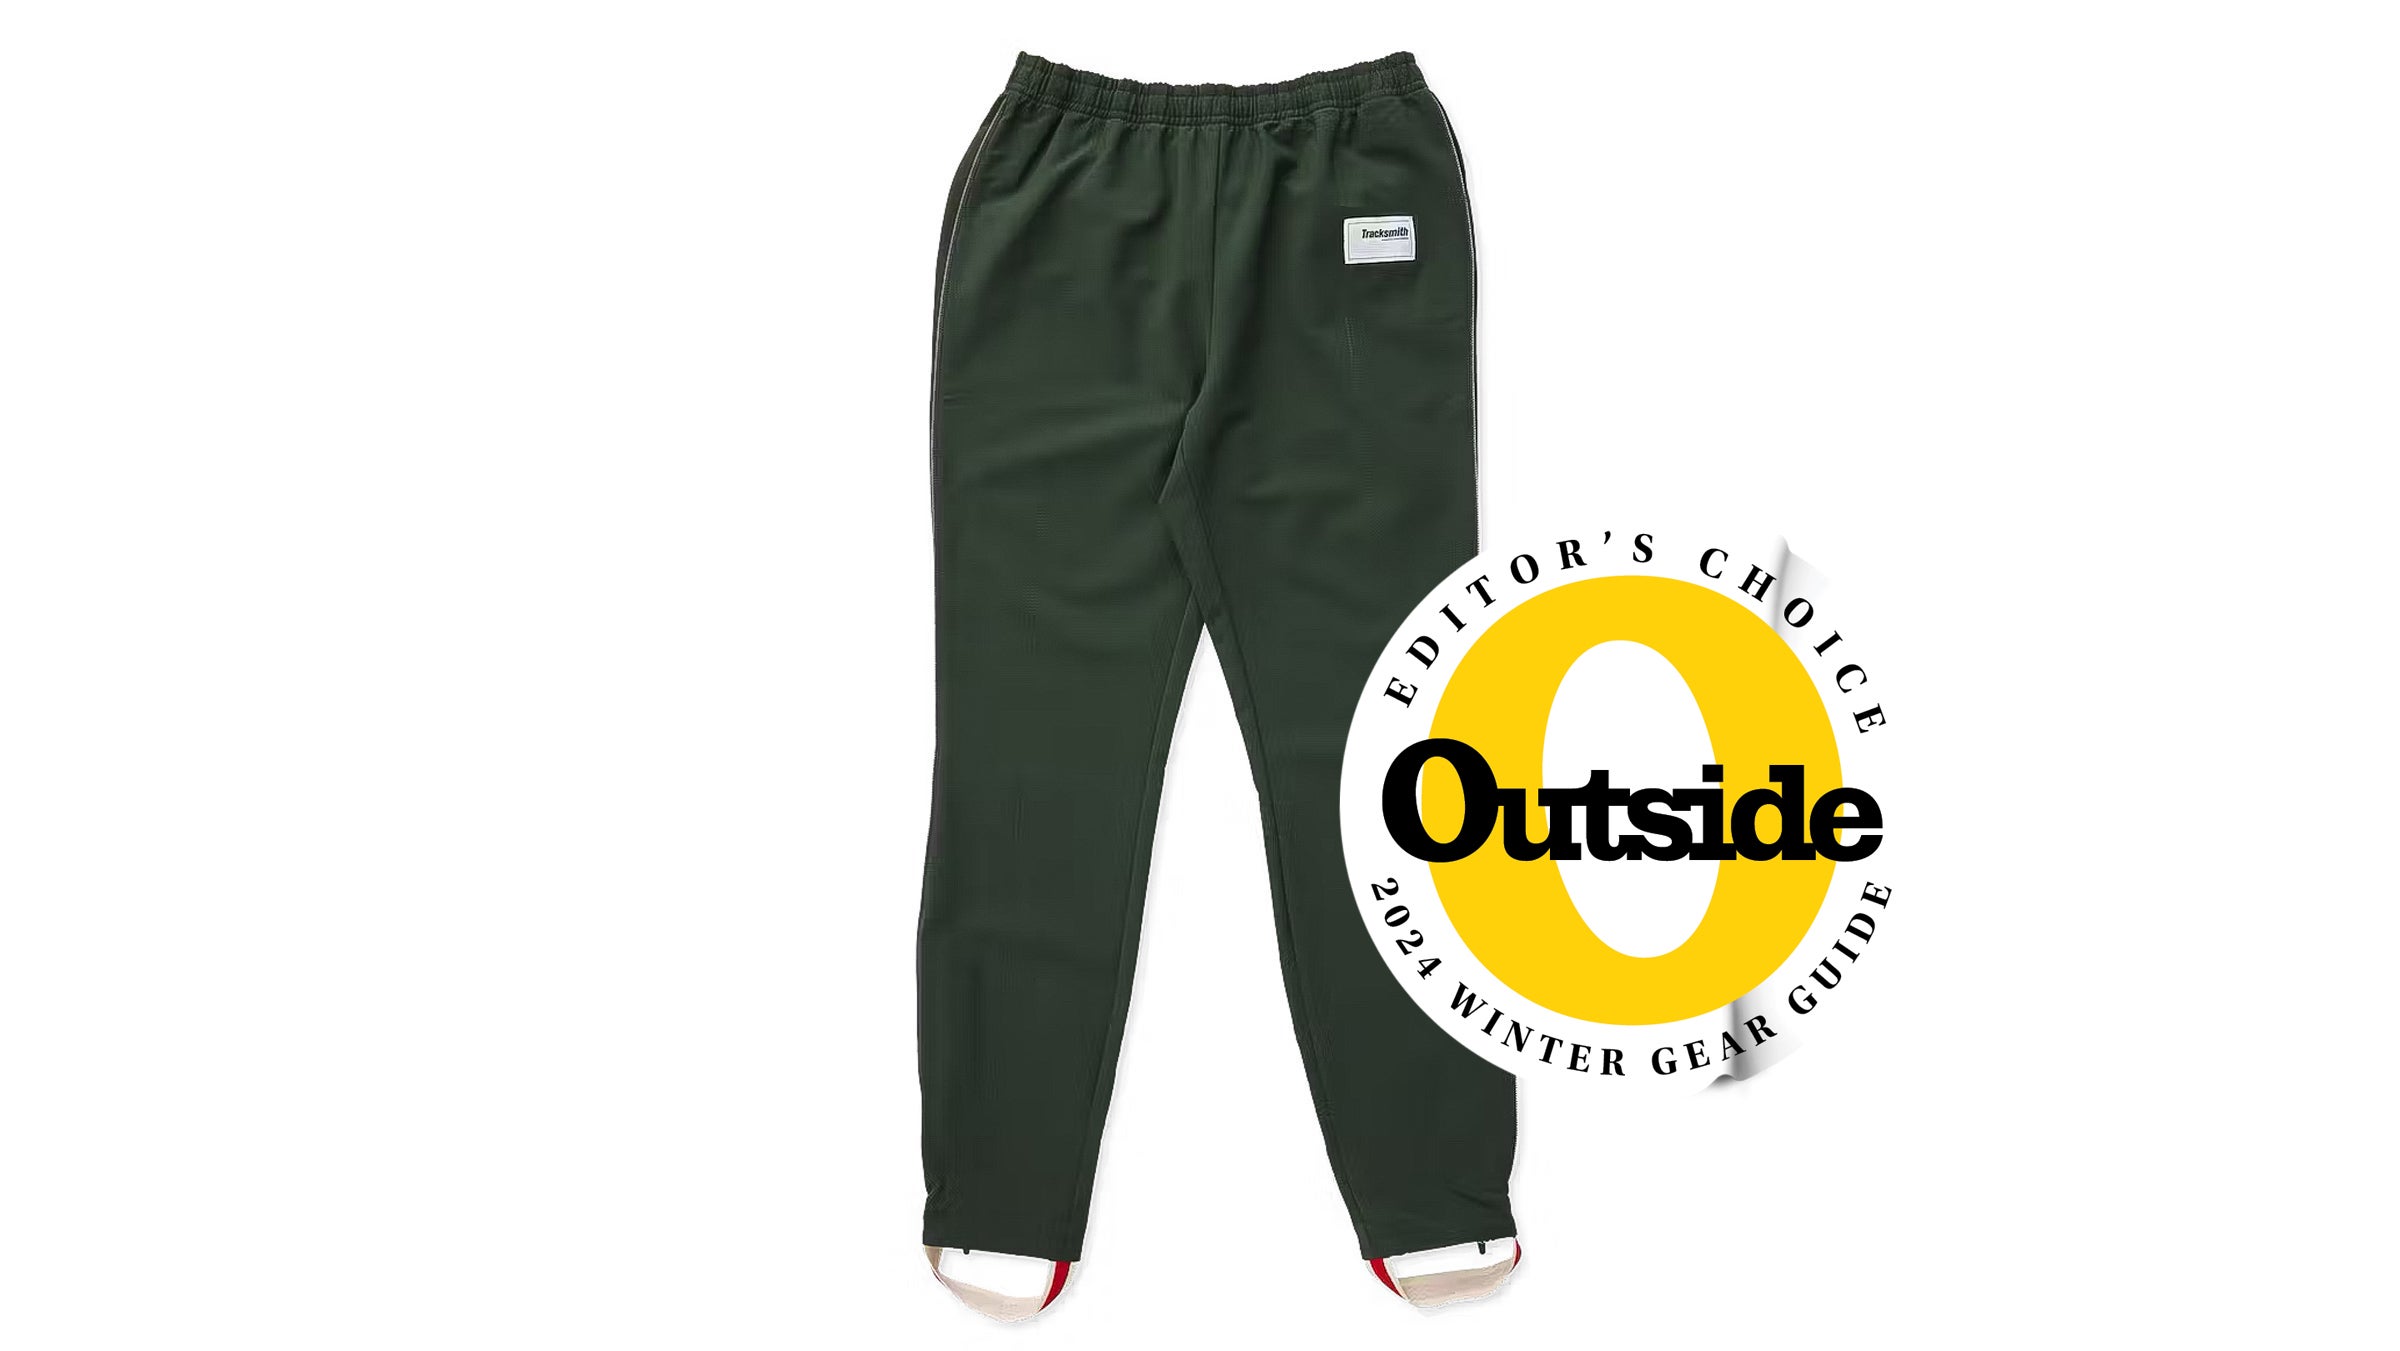 The Best Sweatpants And Joggers That Actually Fit Tall Men | HuffPost Life